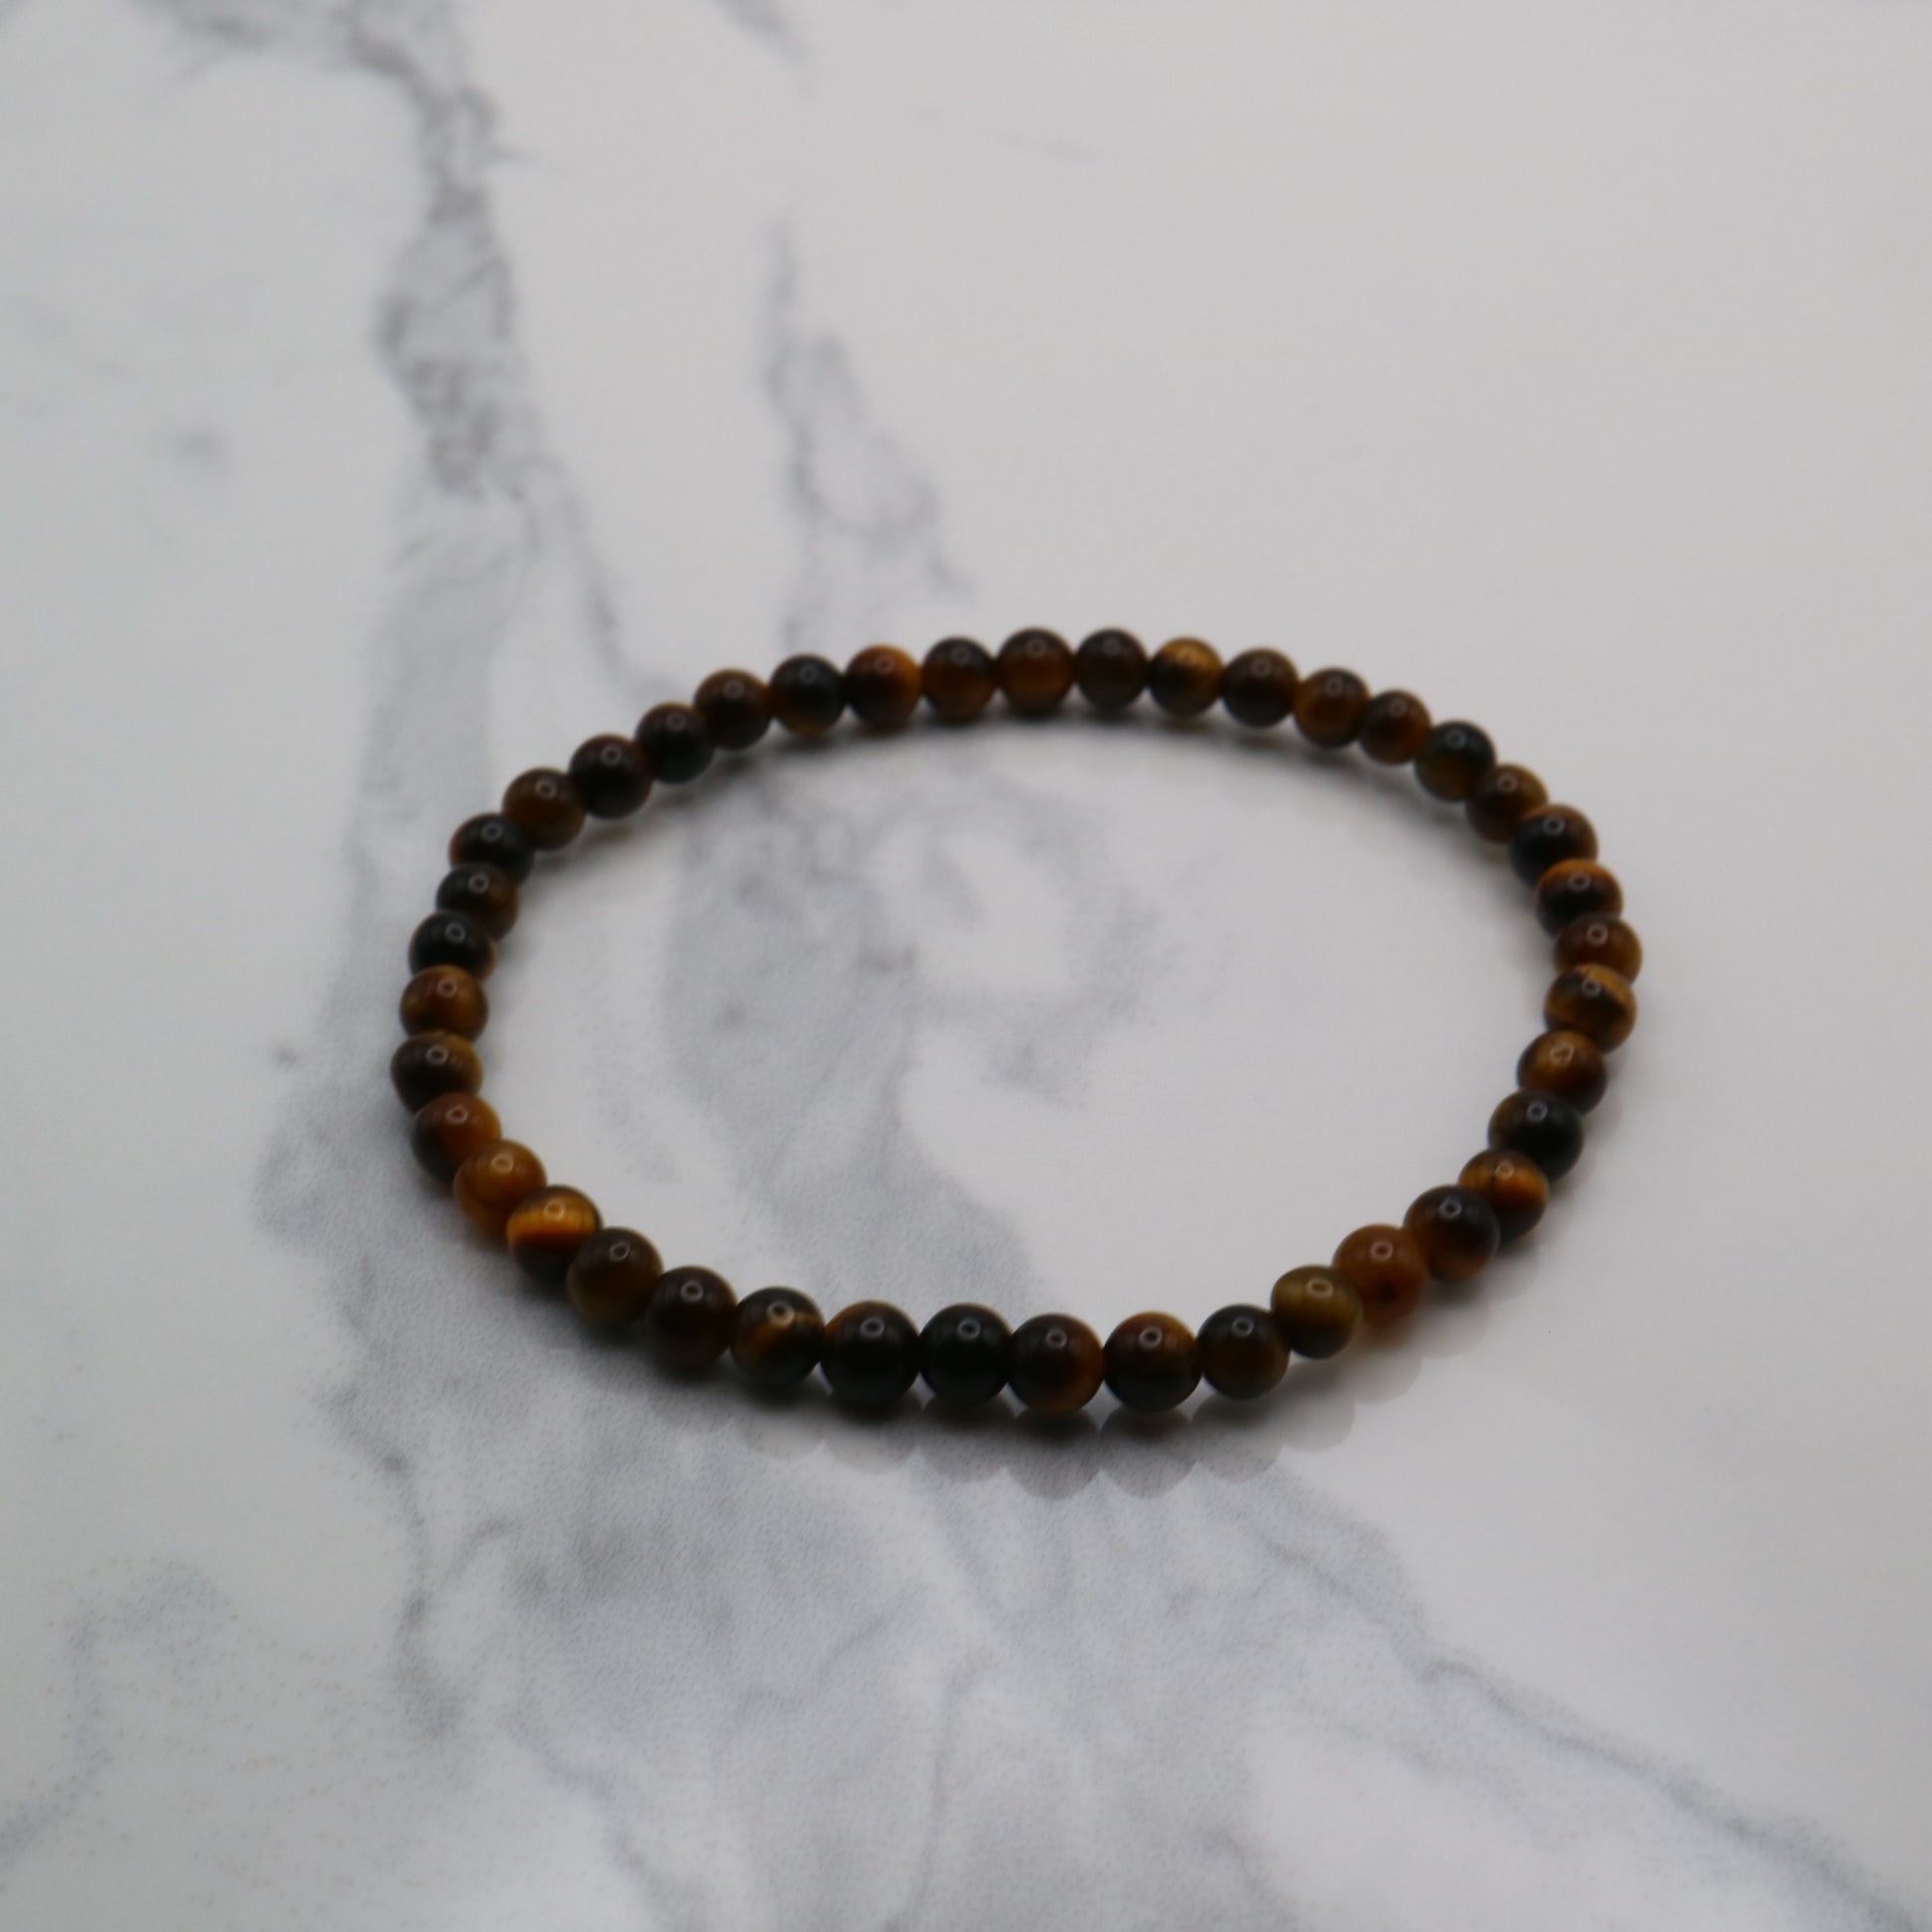 Tiger Eye crystal bead bracelet with 4mm size beads